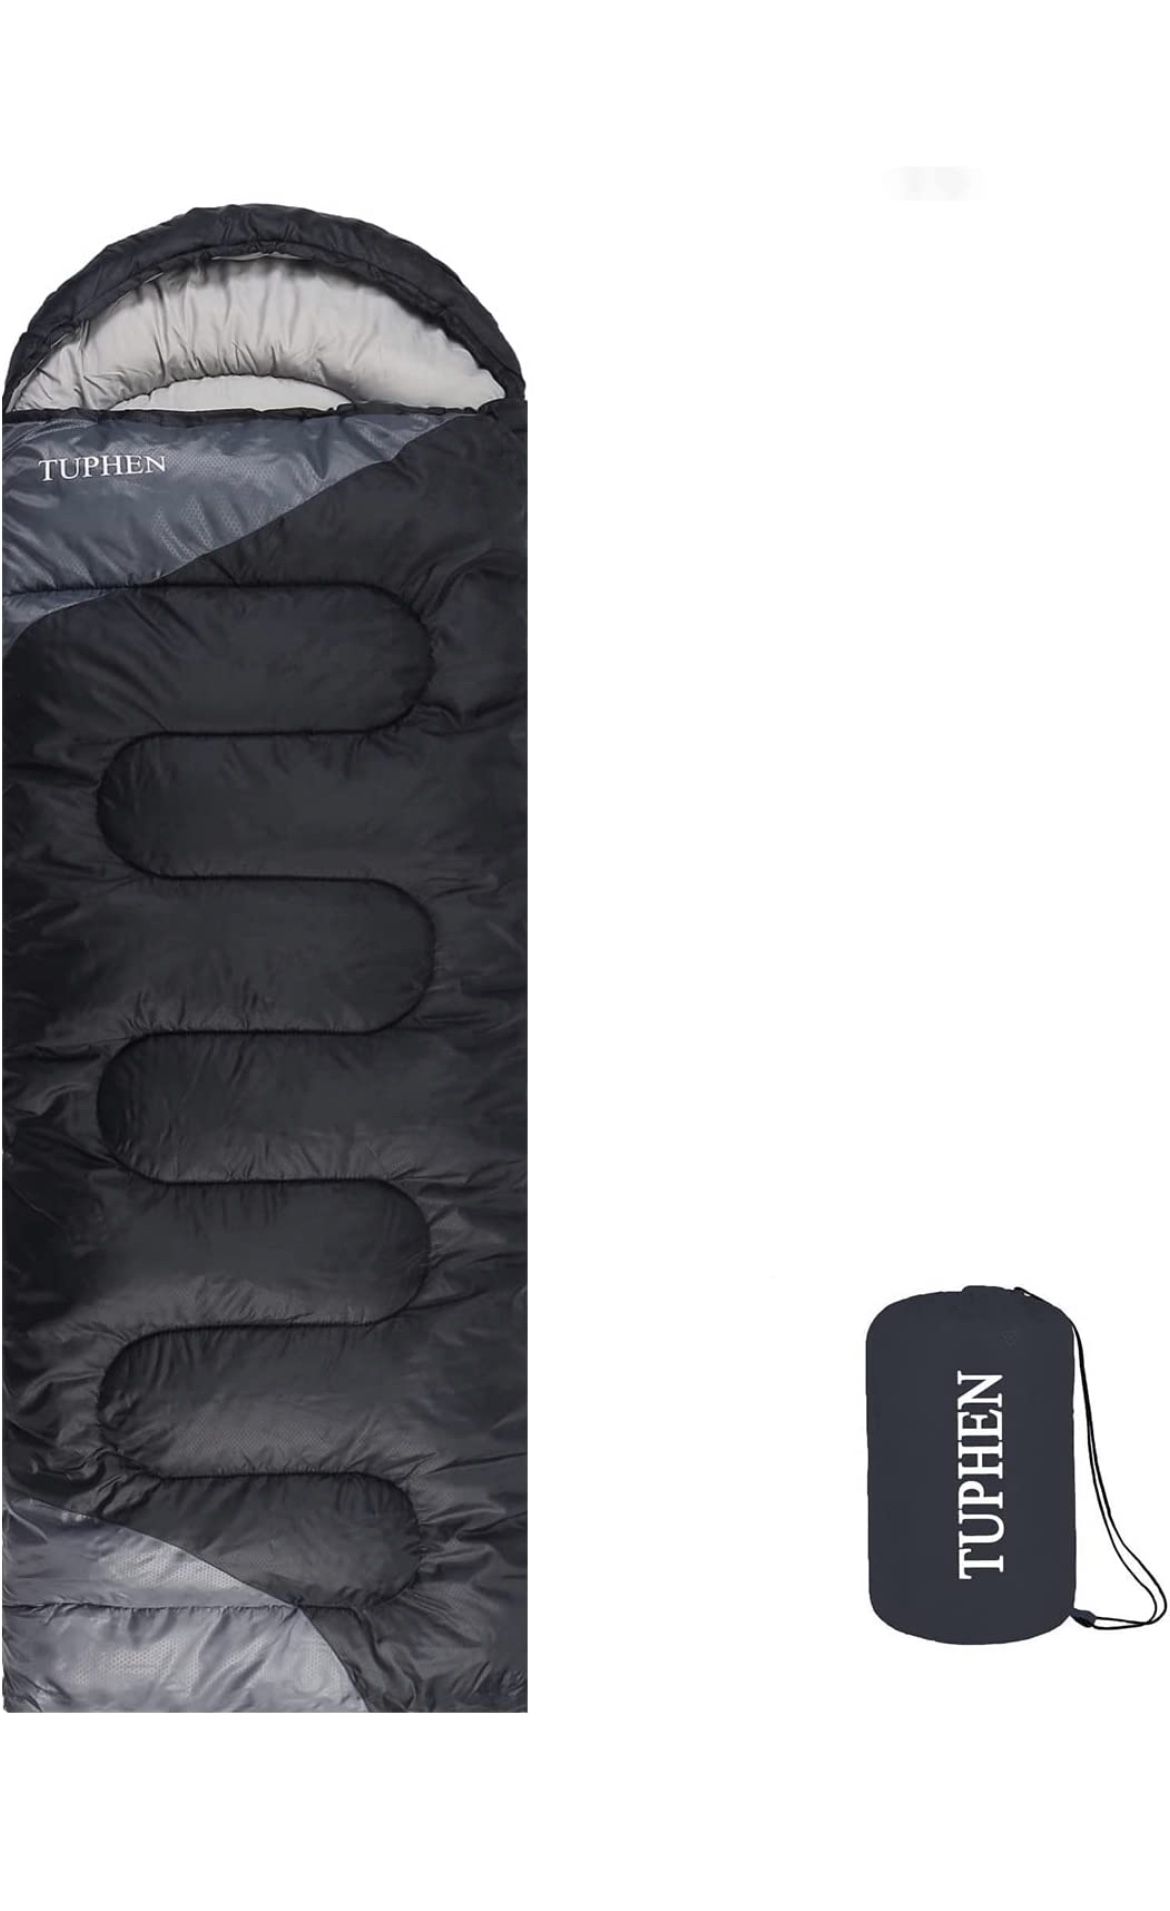 tuphen- Sleeping Bags for Adults Kids Boys Girls Backpacking Hiking Camping Cotton Liner, Cold Warm Weather 4 Seasons Winter, Fall, Spring, Summer, In